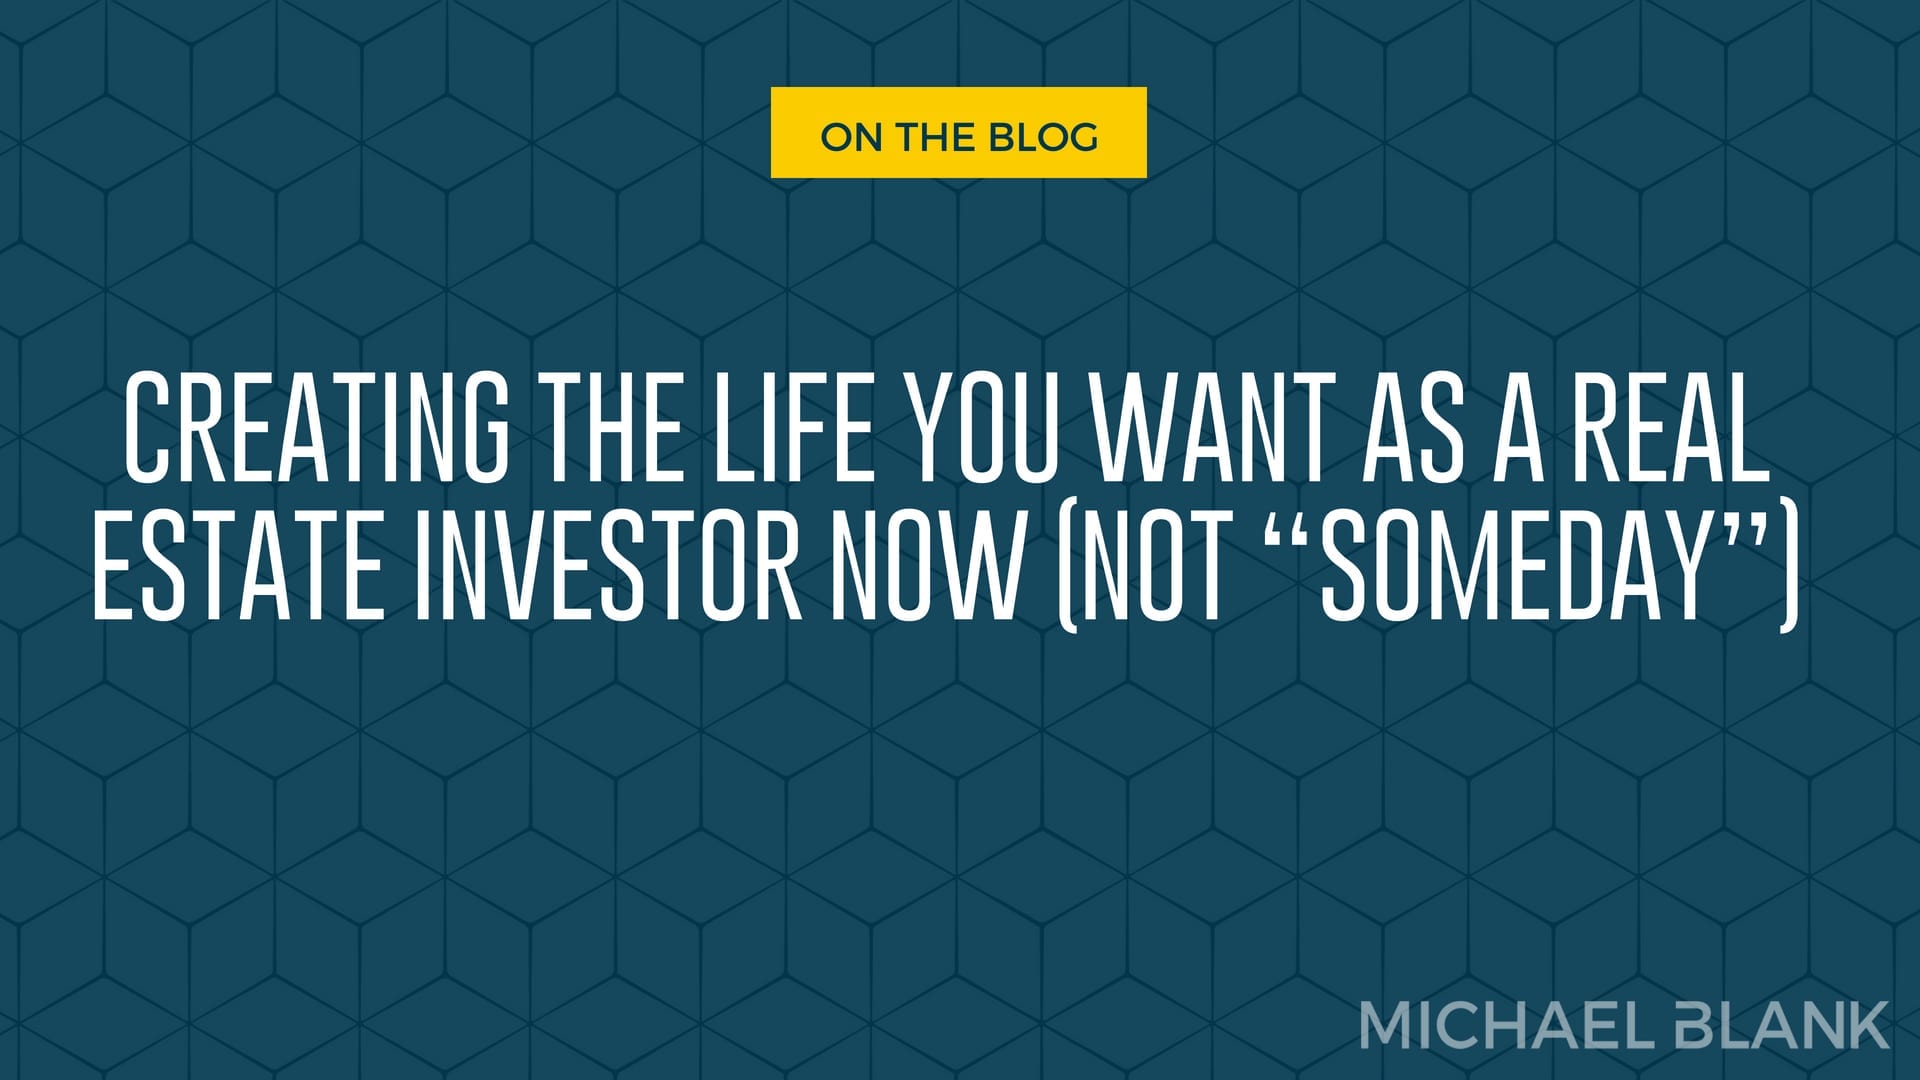 Creating The Life You Want As A Real Estate Investor Now (Not “Someday”)